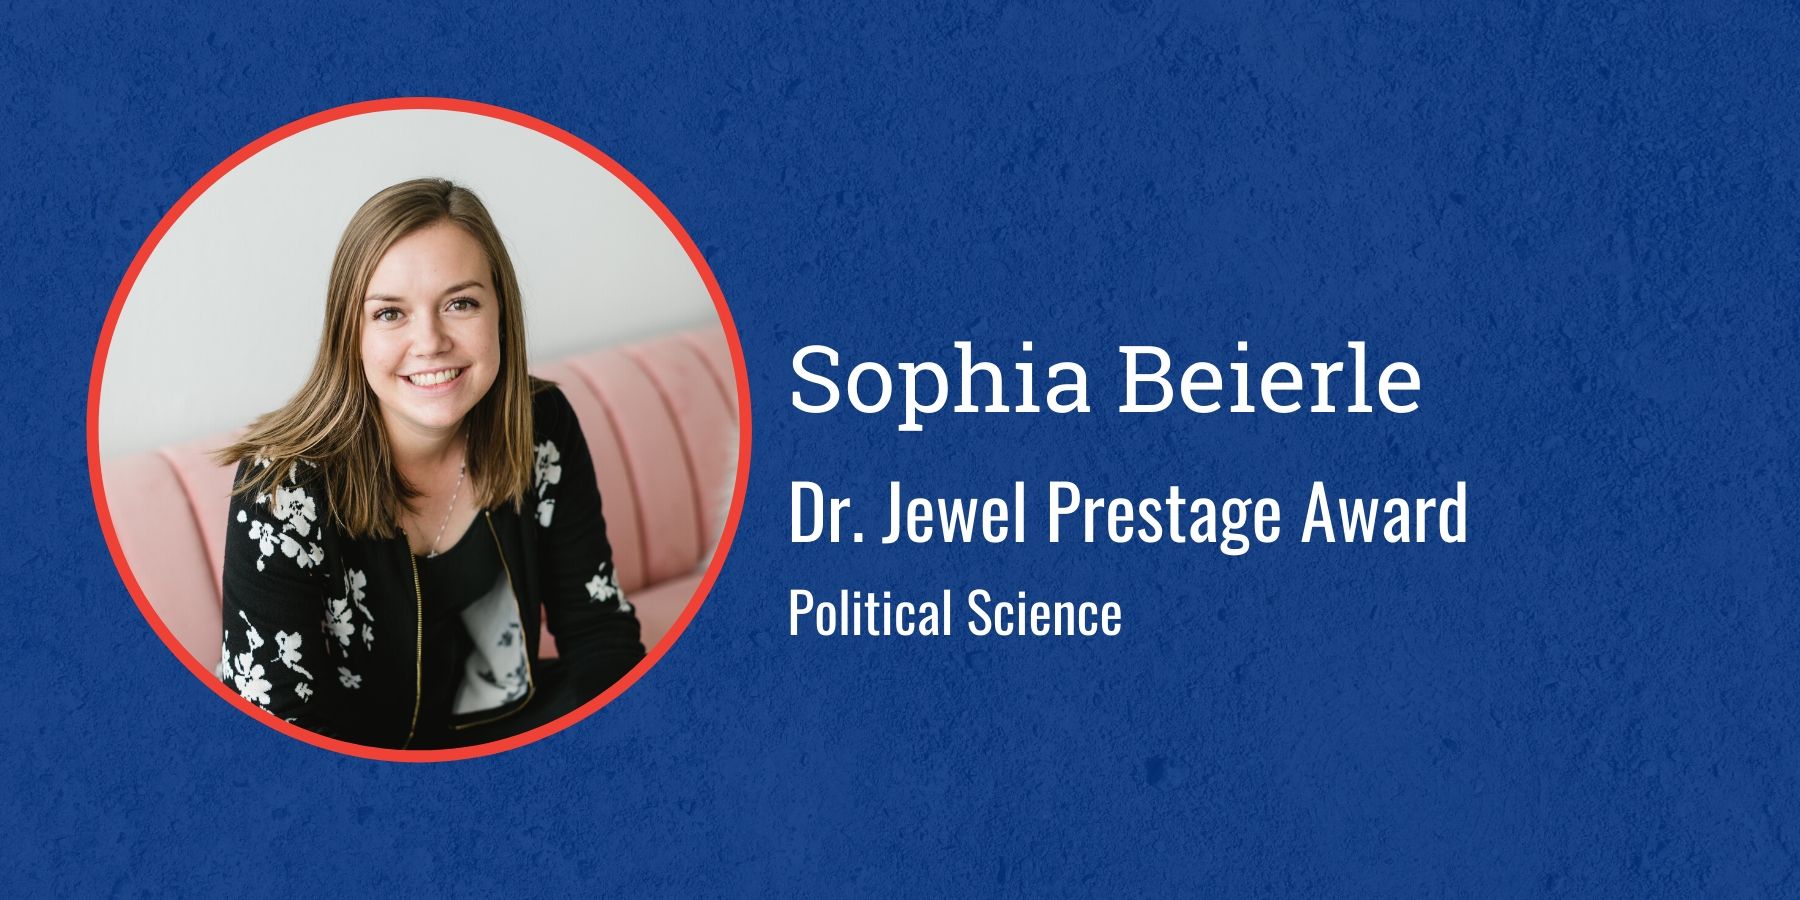 Photo of Sophia Beierle with text Dr. Jewel Prestage Award, Political Science